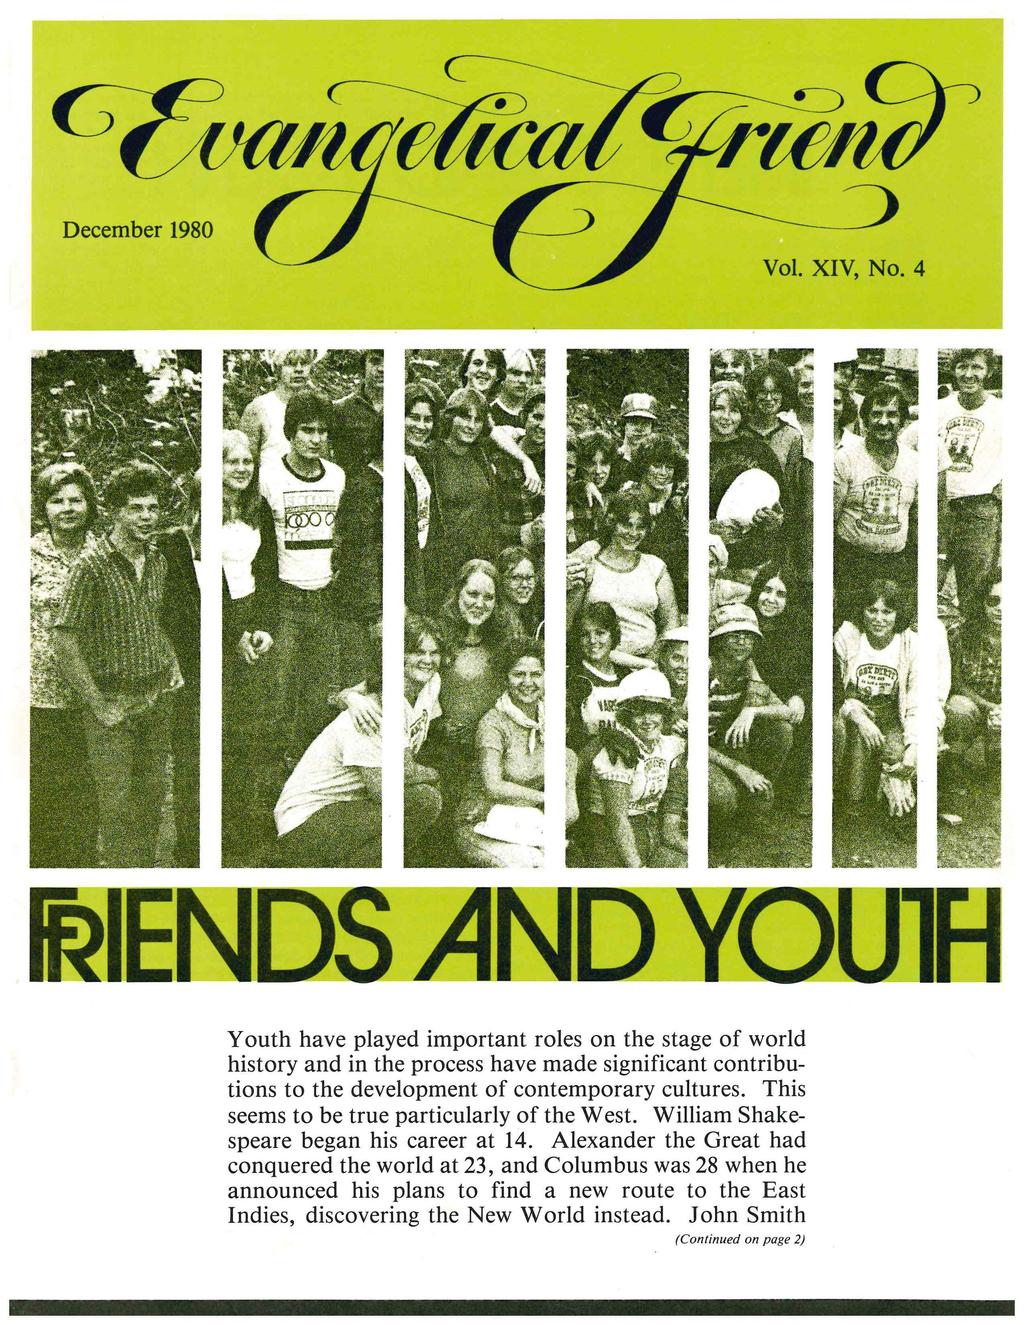 December 1980 Vol. XIV, No.4 Youth have played important roles on the stage of world history and in the process have made significant contributions to the development of contemporary cultures.